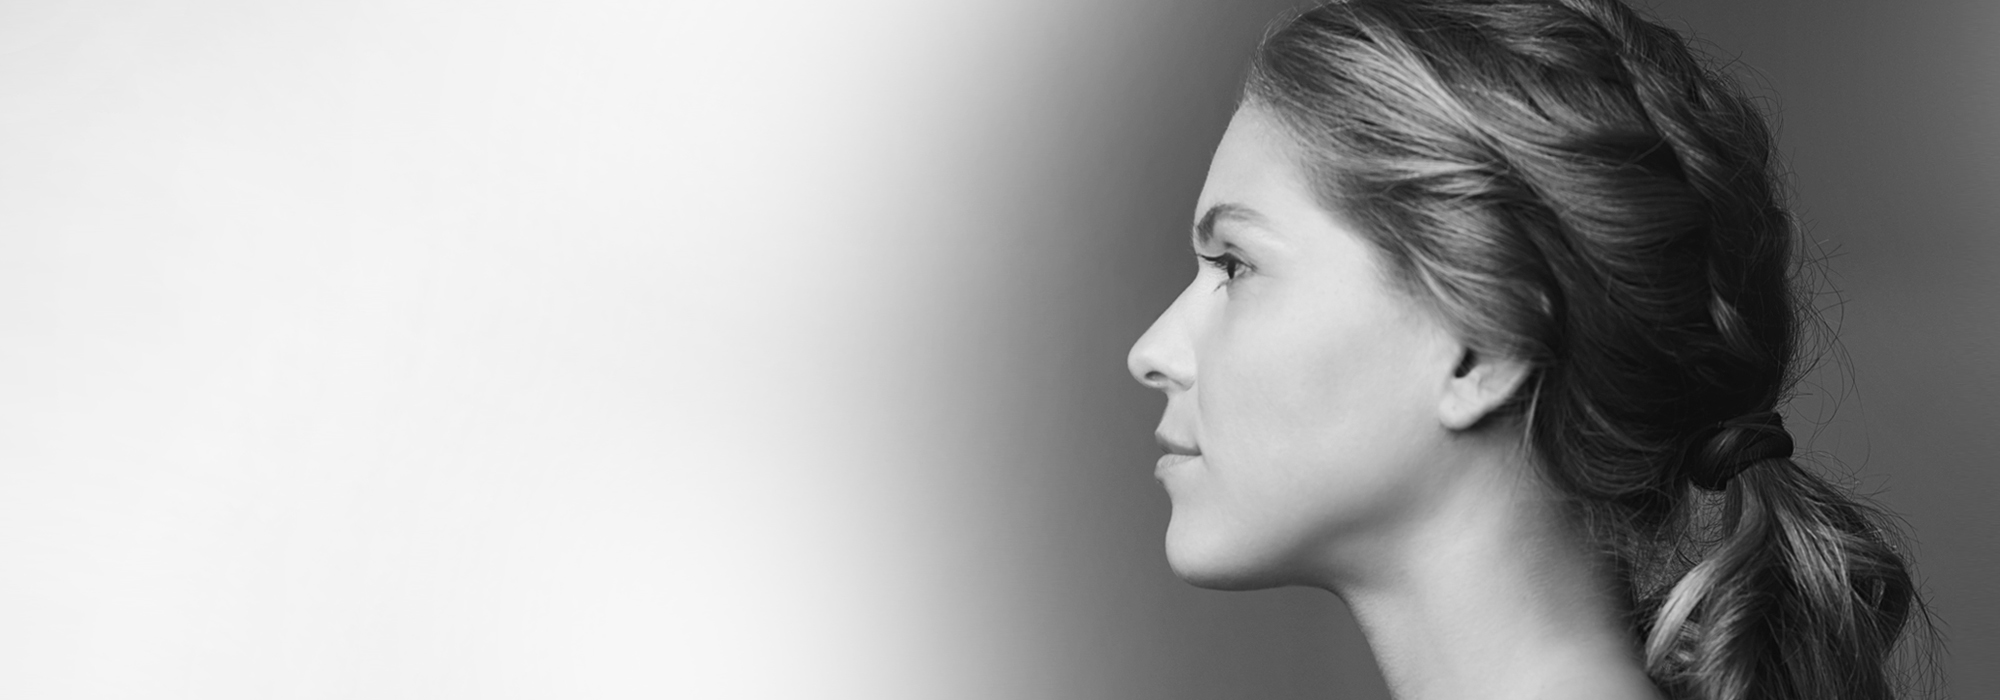 Rhinoplasty (Nose surgery) at Younger Facial Surgery Centre in Vancouver.